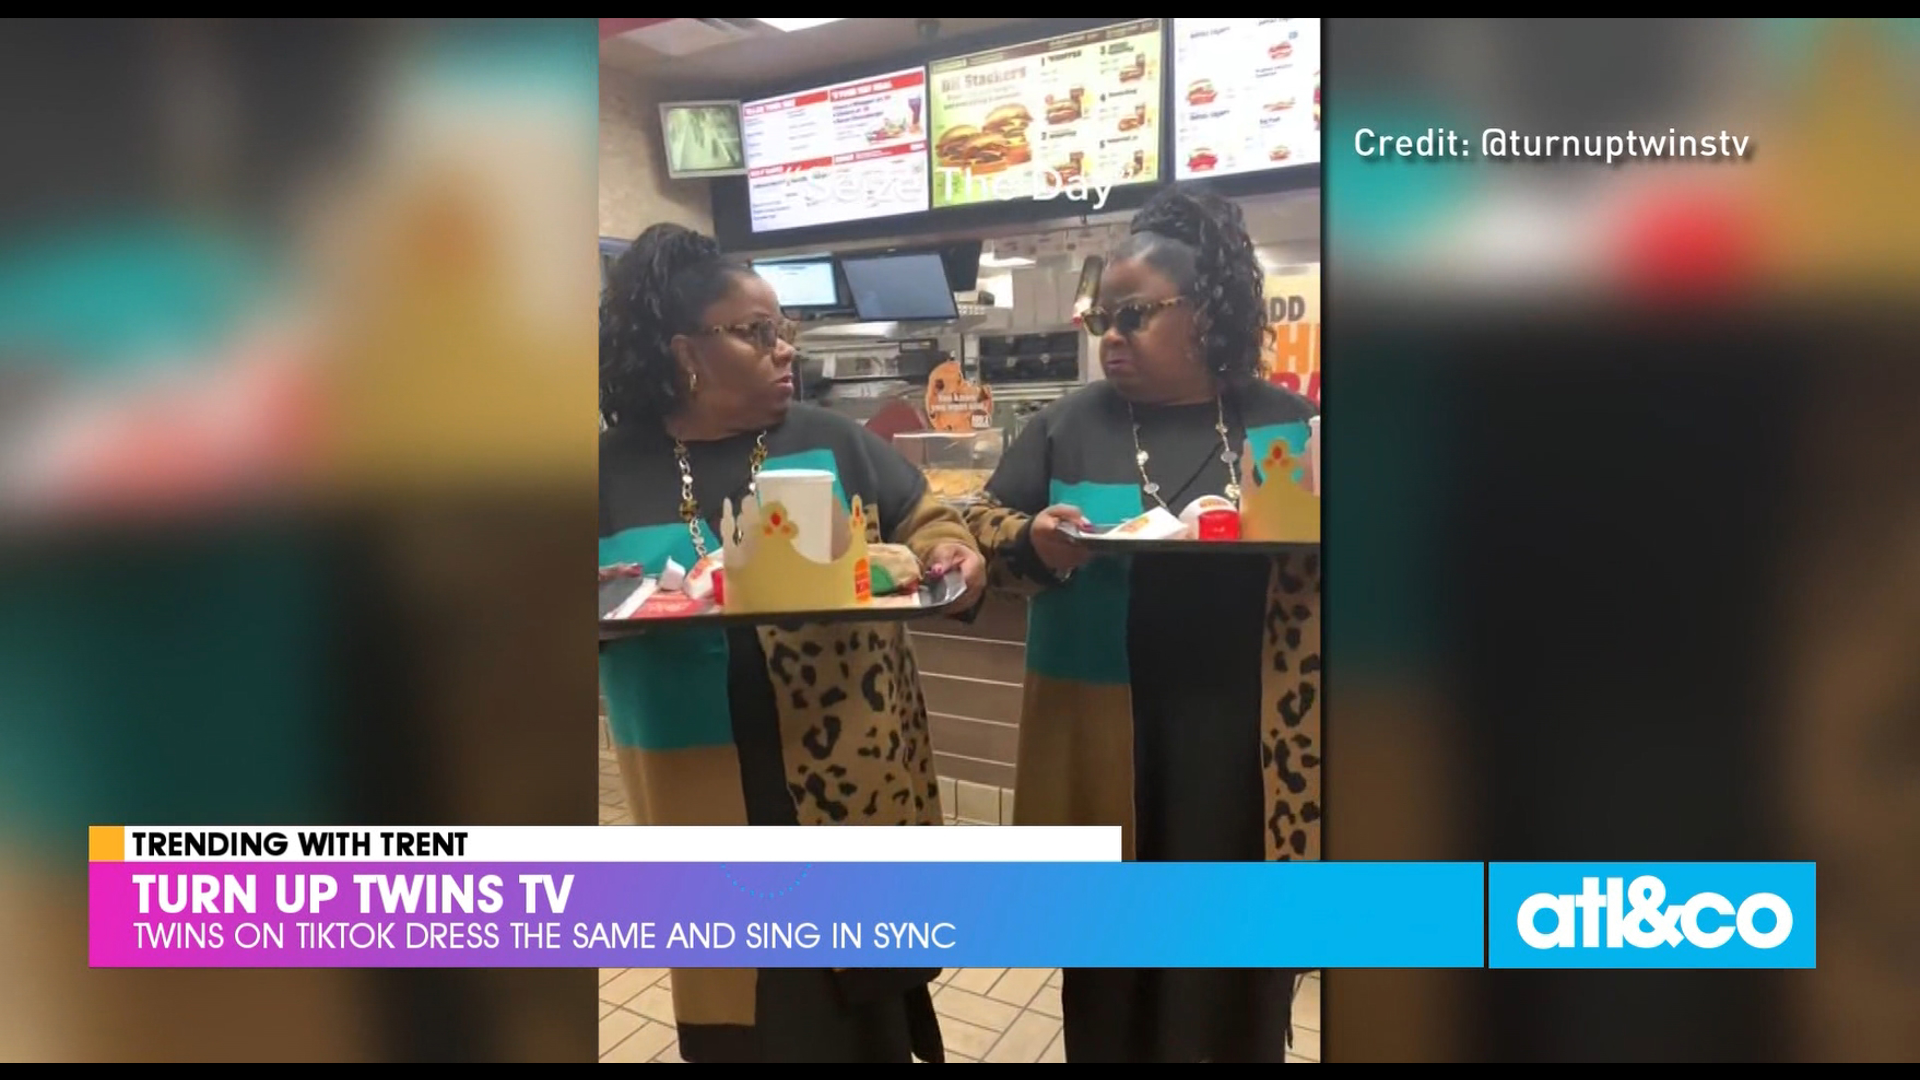 These TikTok twins @turnuptwinstv are queens at Burger King, finding steals and deals at Ross, and singing all the while.